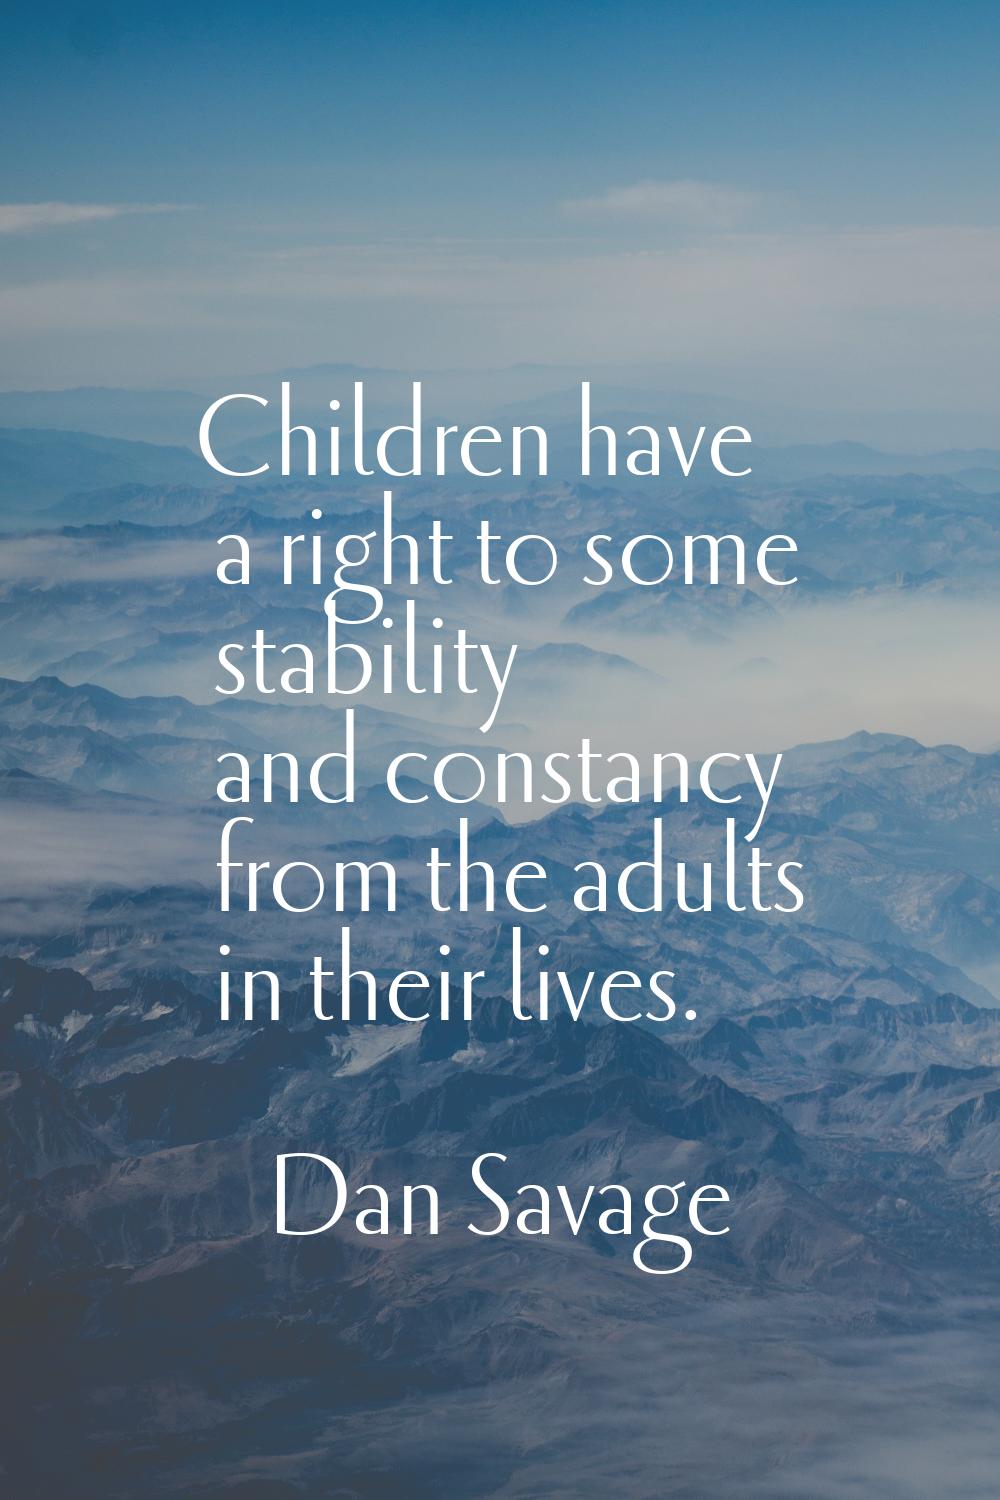 Children have a right to some stability and constancy from the adults in their lives.